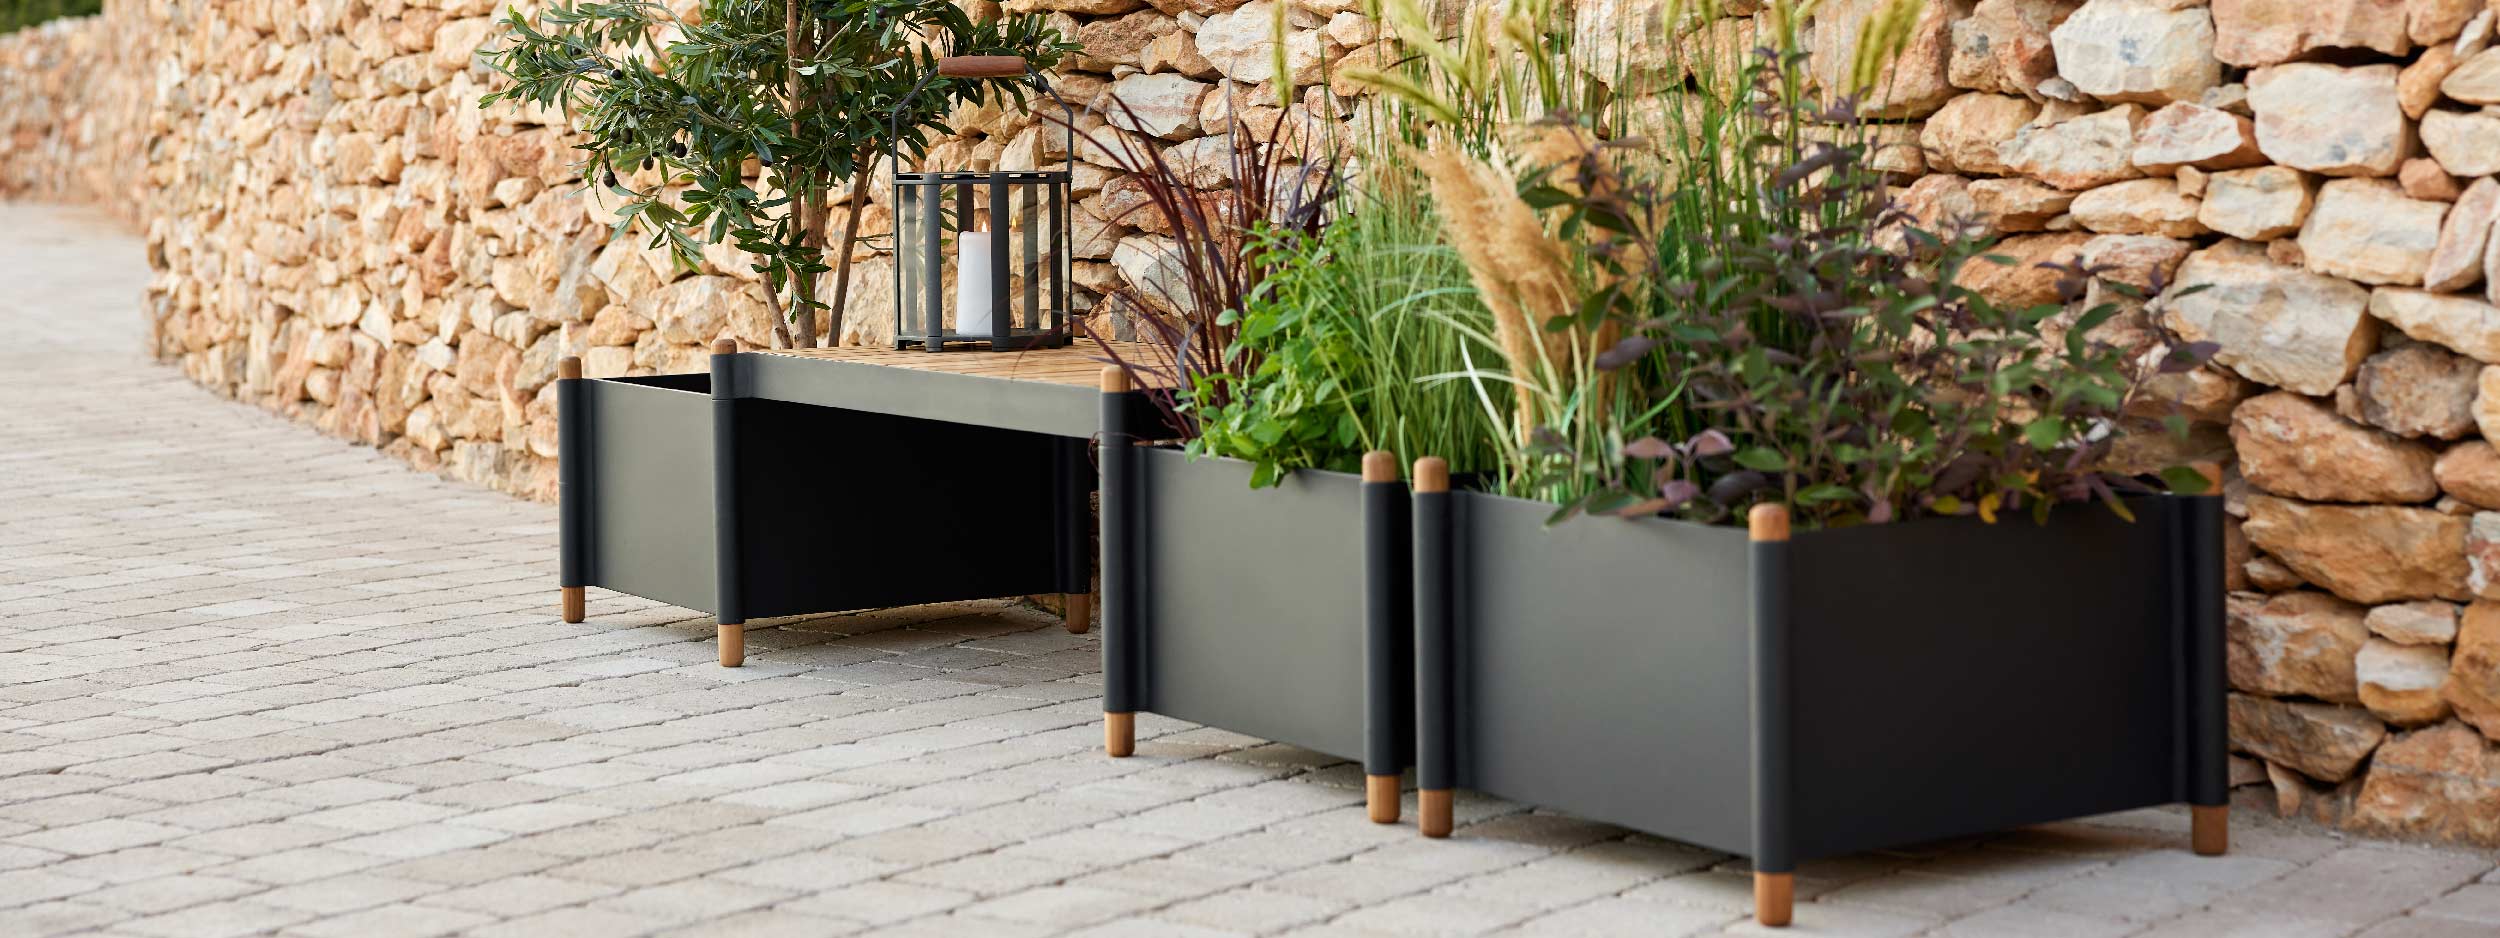 Image of Cane-line Sticks planter & bench system, in Lava-Grey powder coated aluminium and FSC certified teak